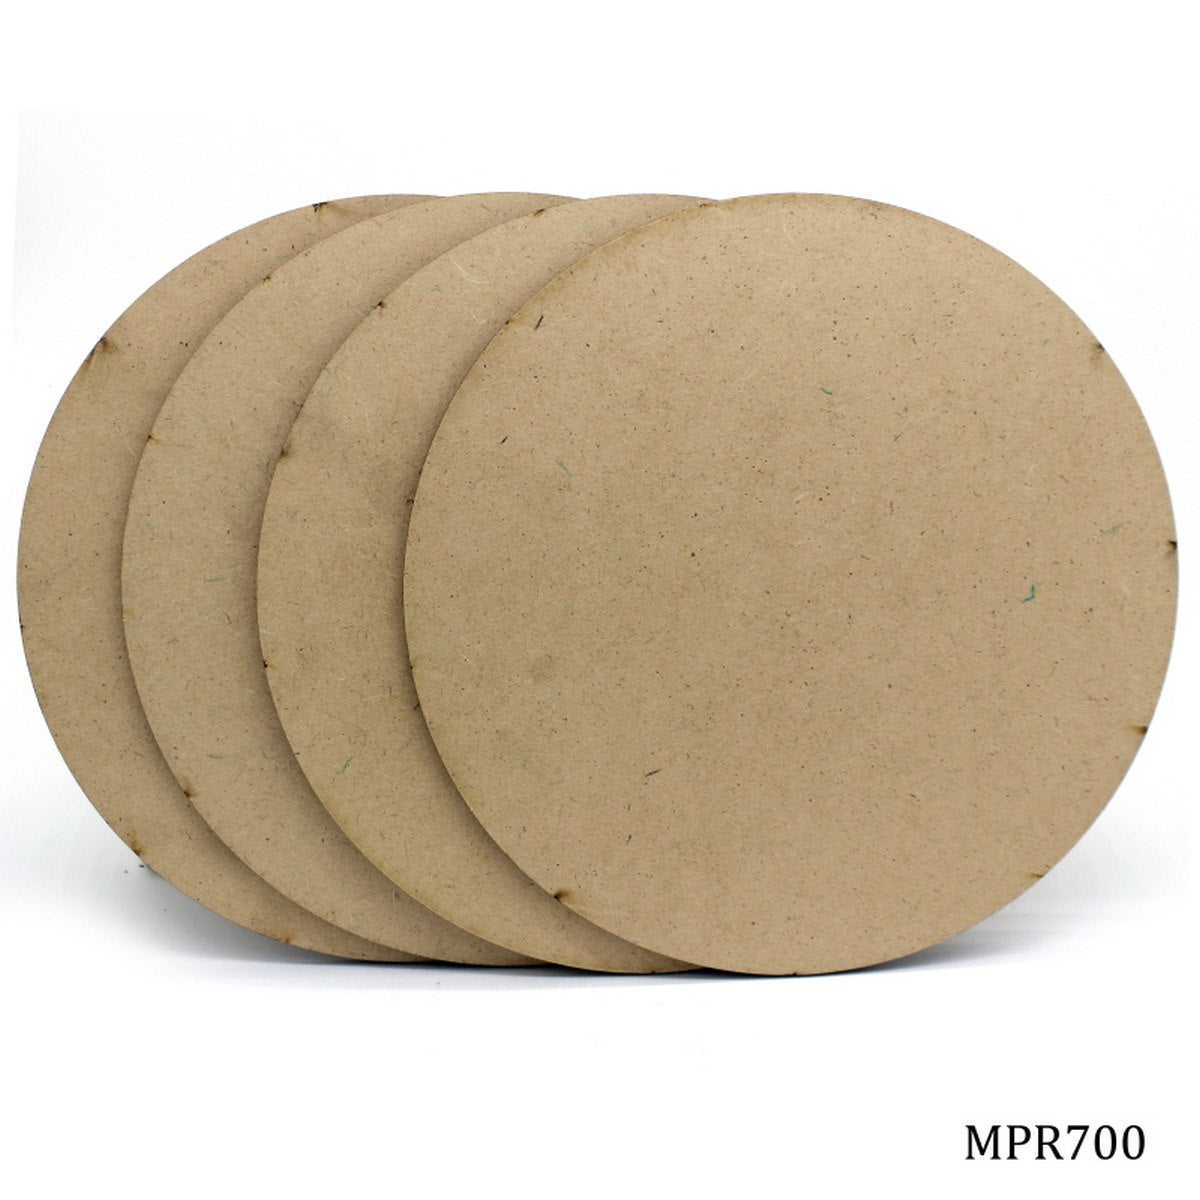 jags-mumbai MDF MDF Plate Round 7 Inch [4mm] (Contain 1 Unit) - Durable and Versatile